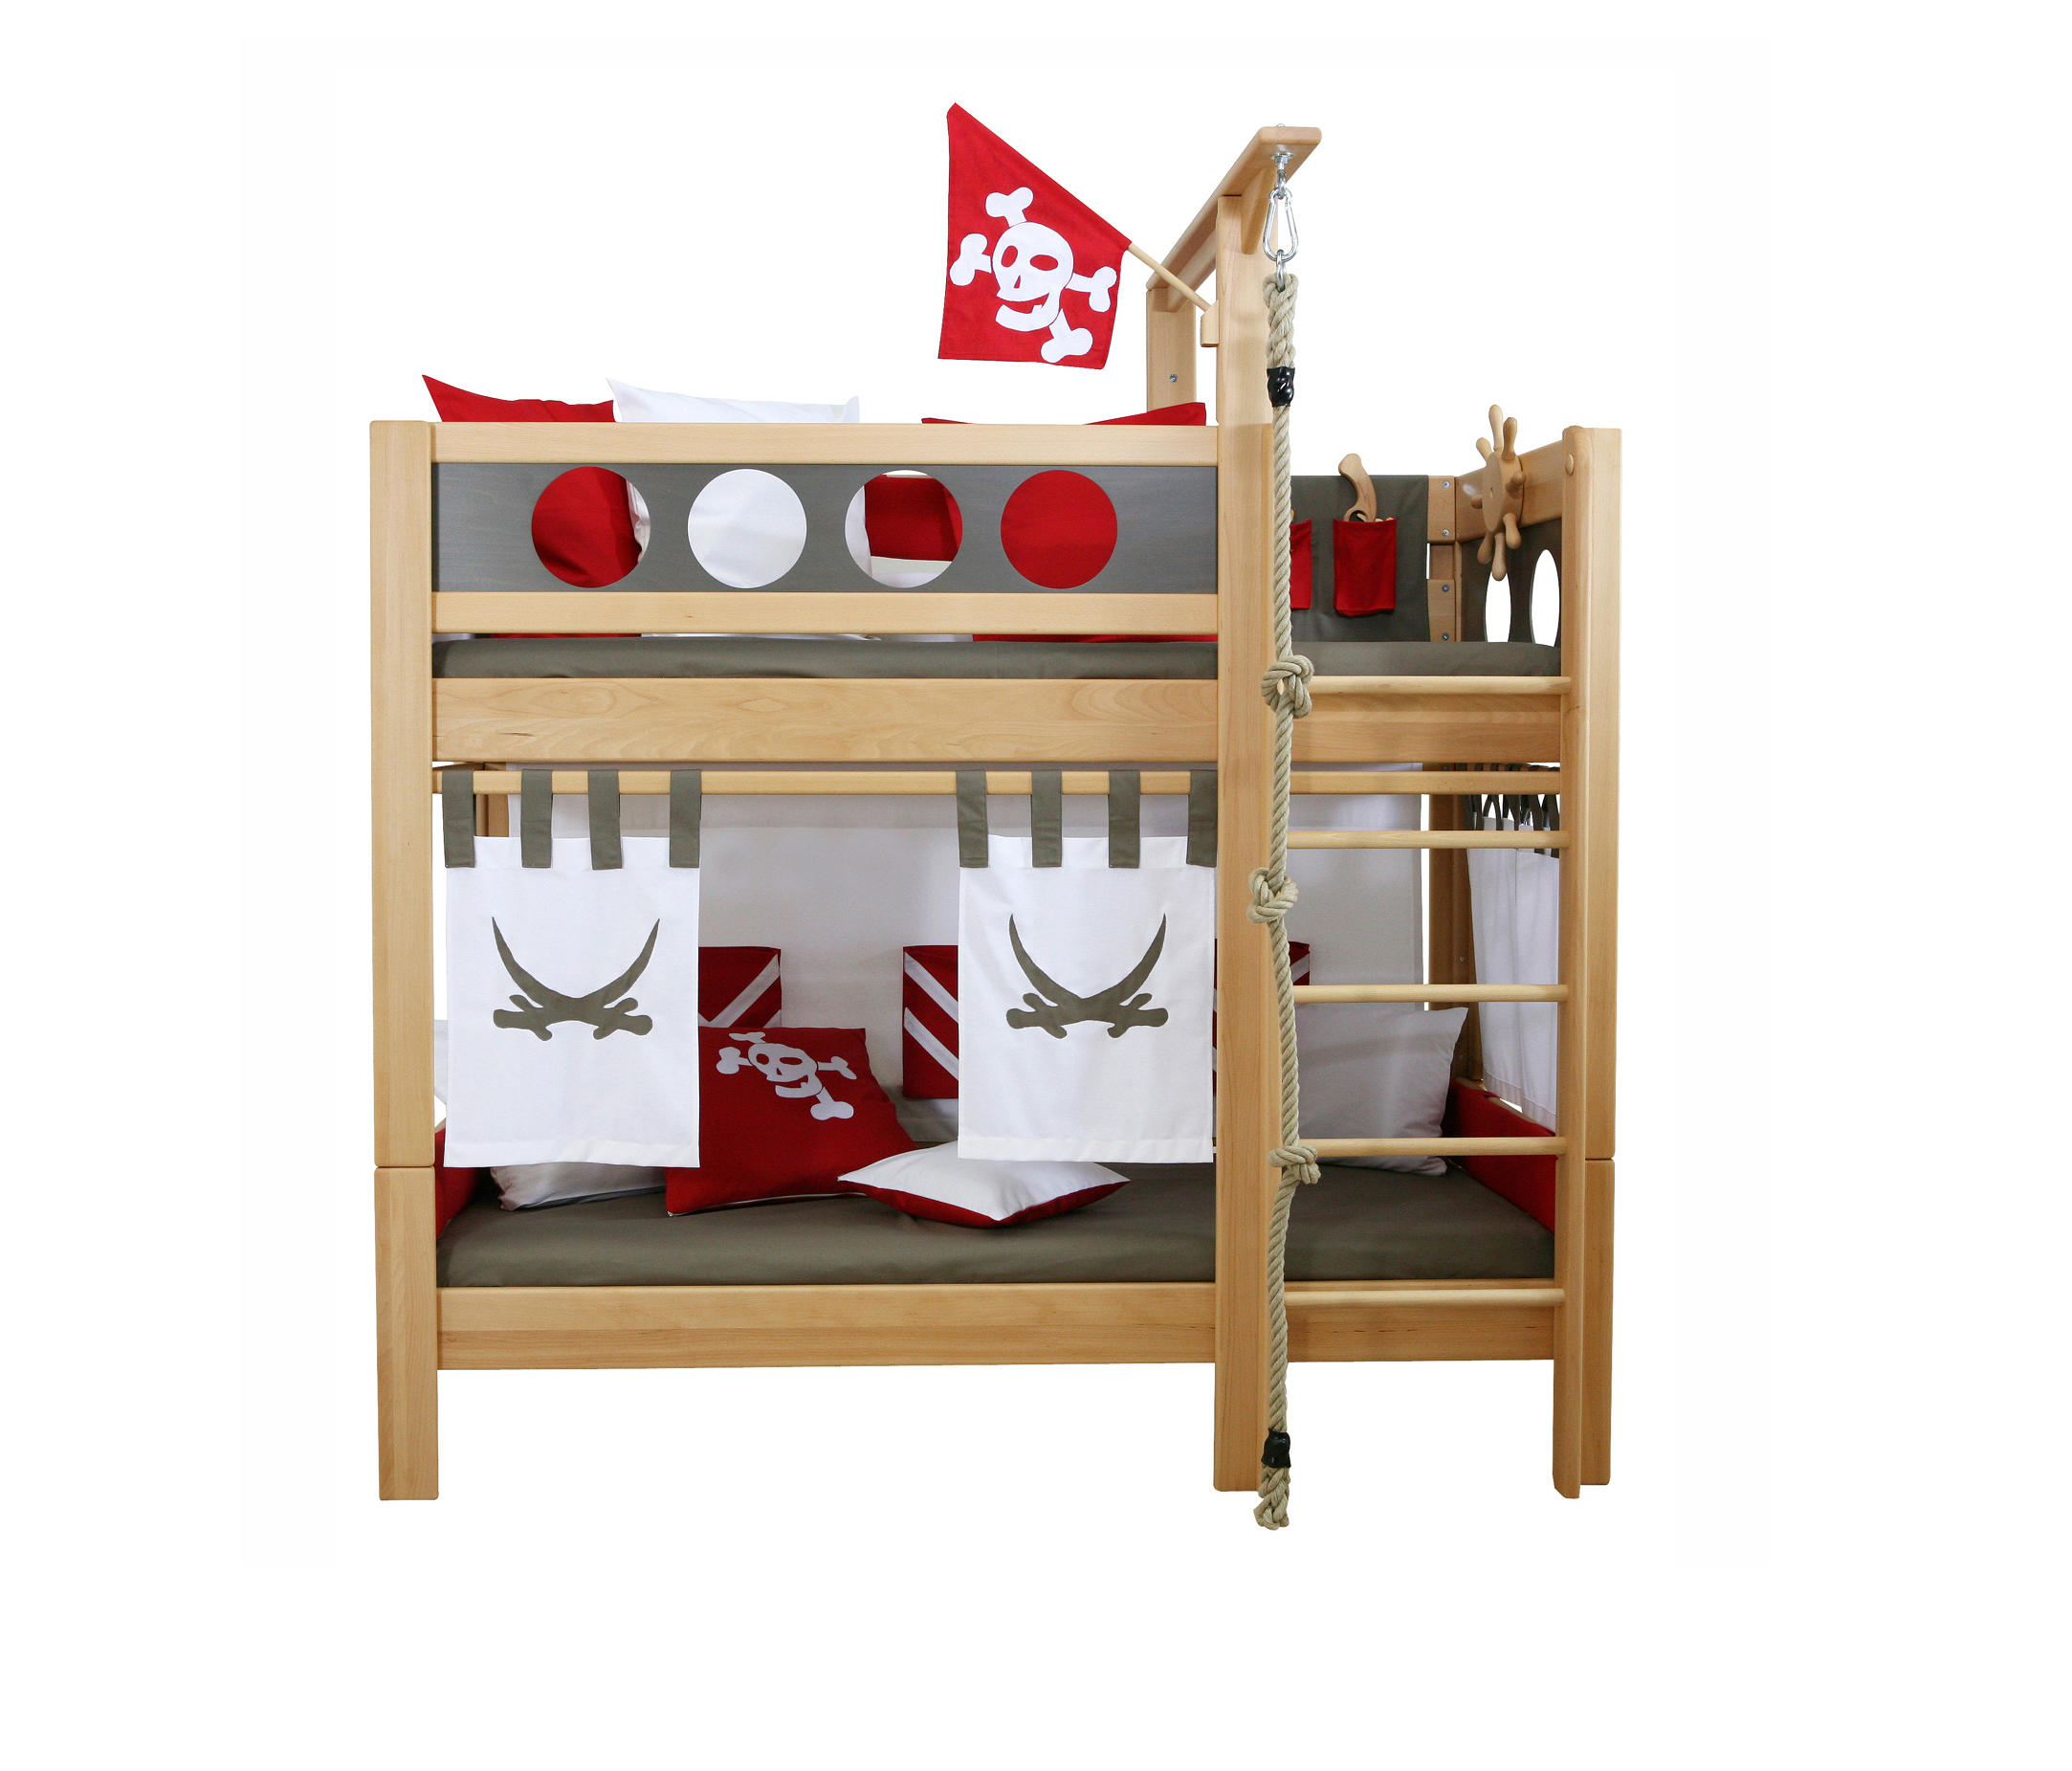 Pirate Bunk Bed Dba 202 9 Architonic, Pirate Bunk Bed